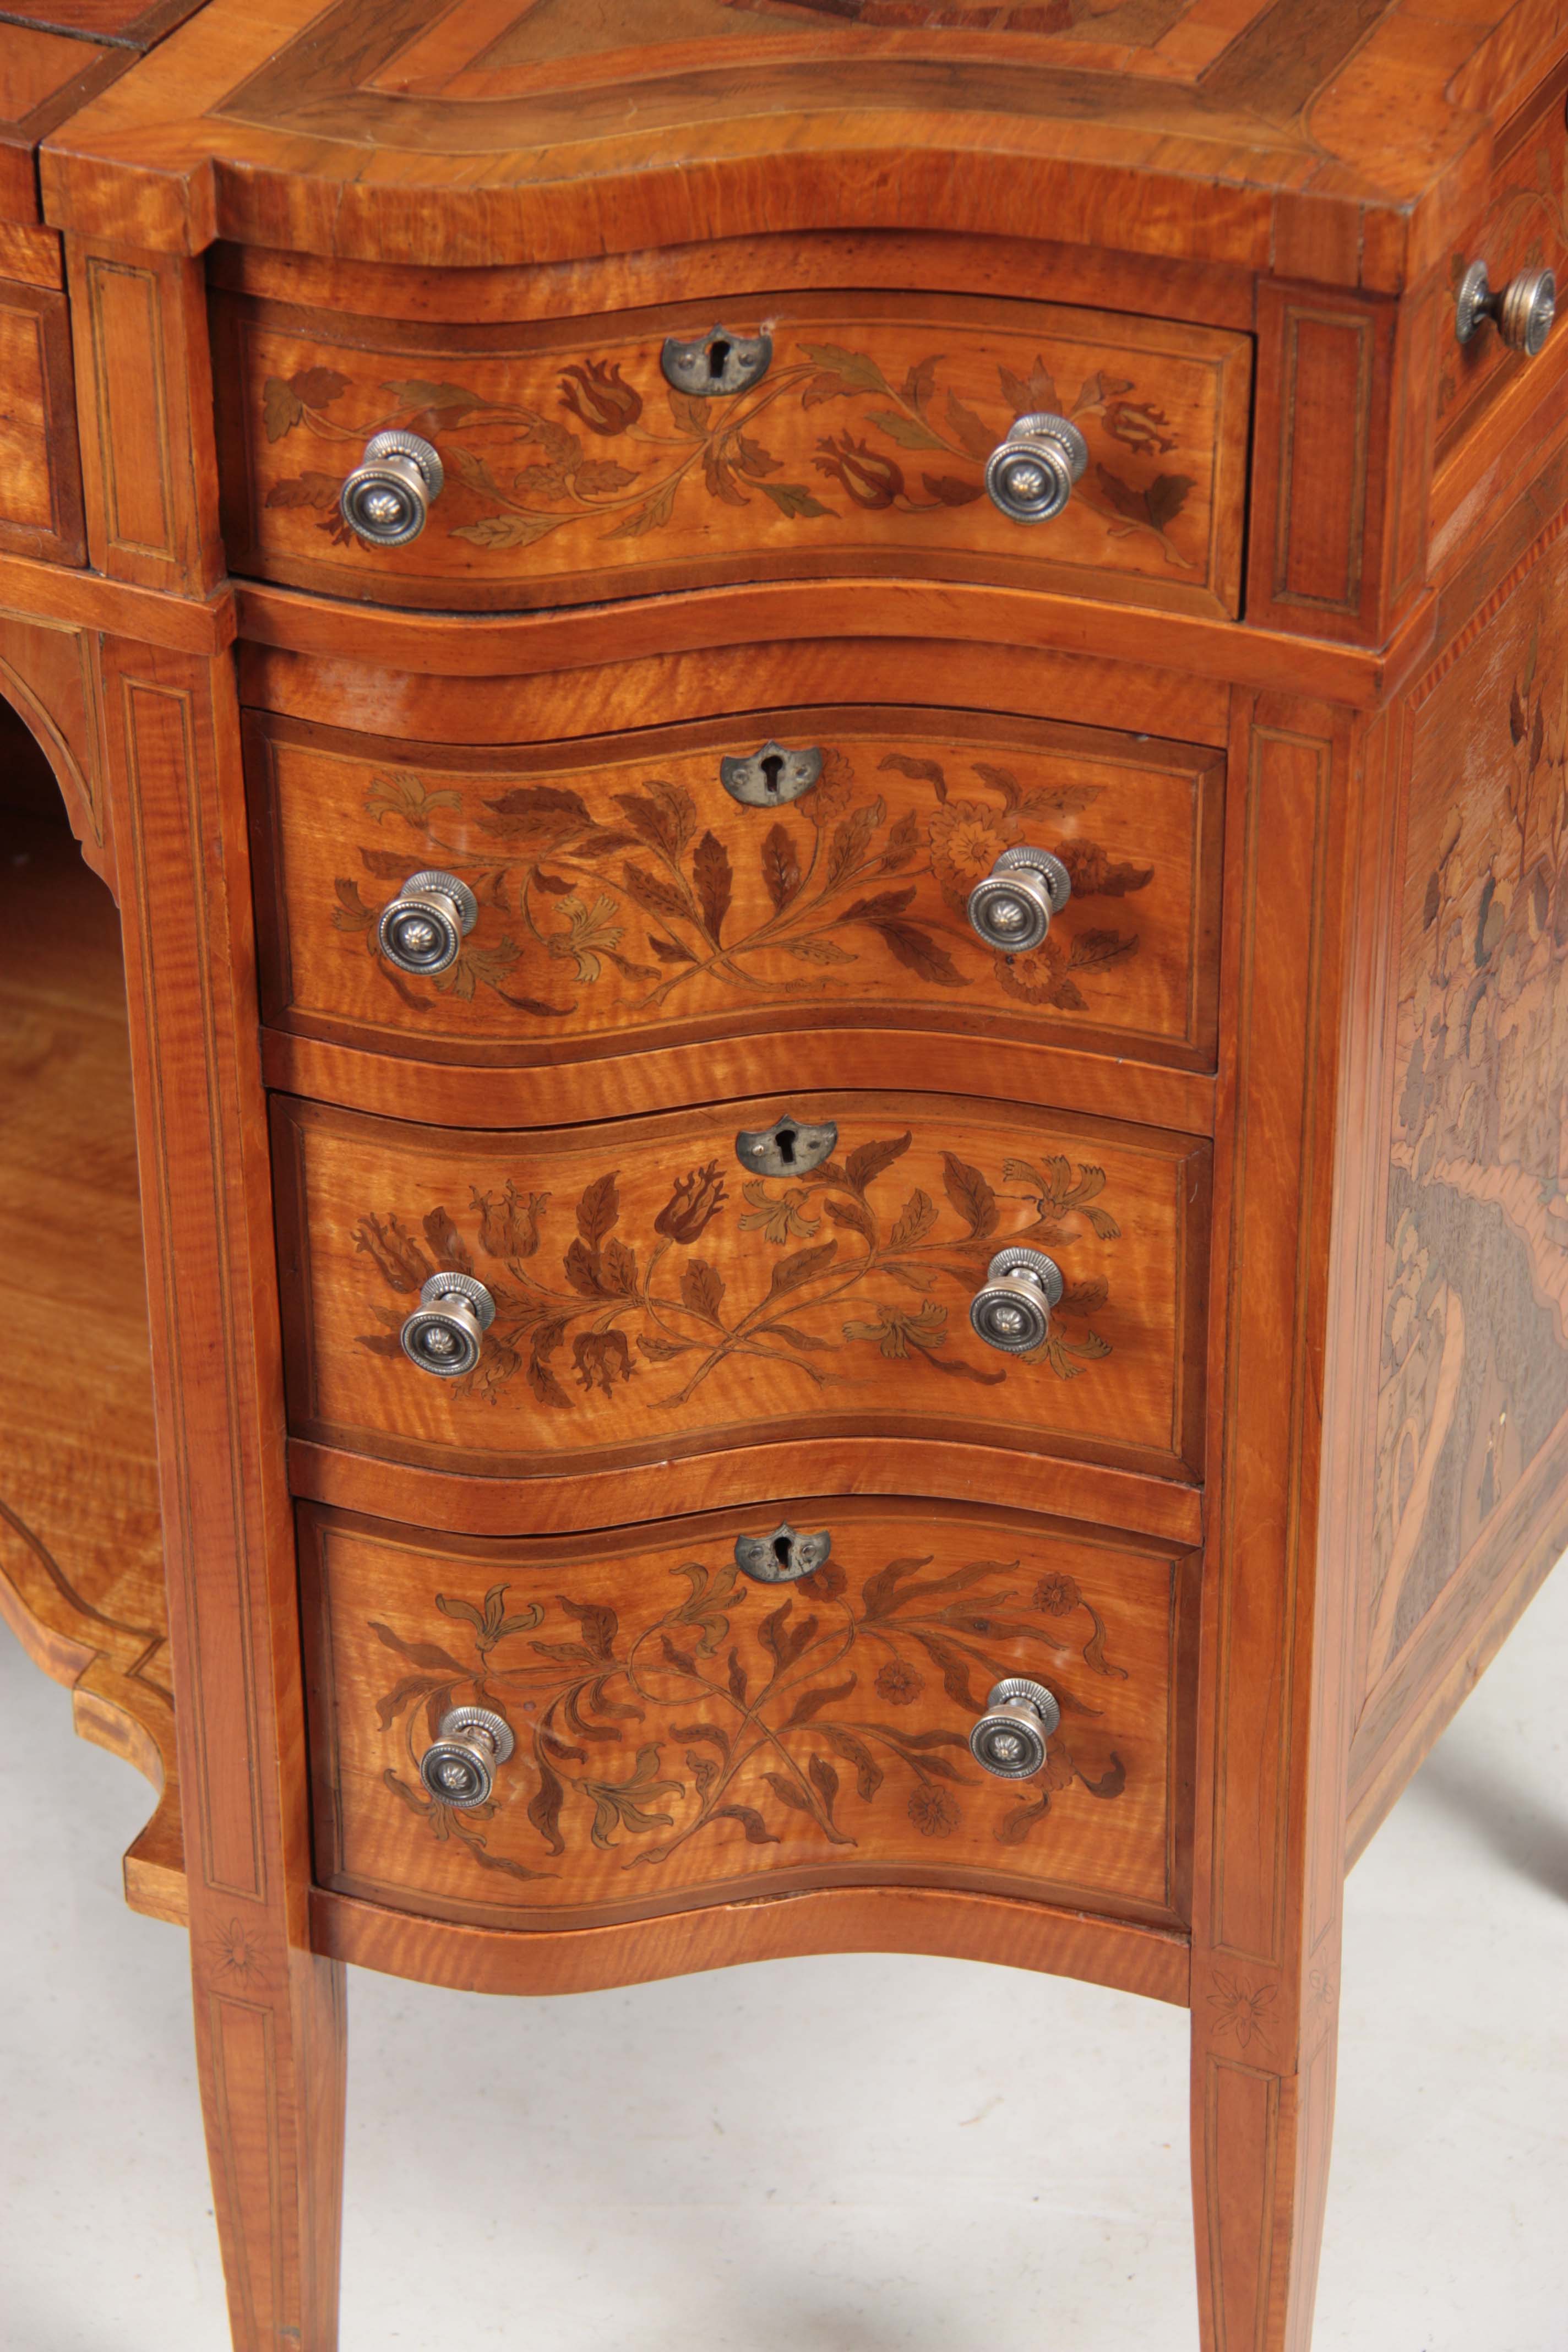 AN UNUSUAL FREESTANDING VICTORIAN SATINWOOD INLAID DESK with floral inlaid serpentine drawers to the - Image 2 of 8